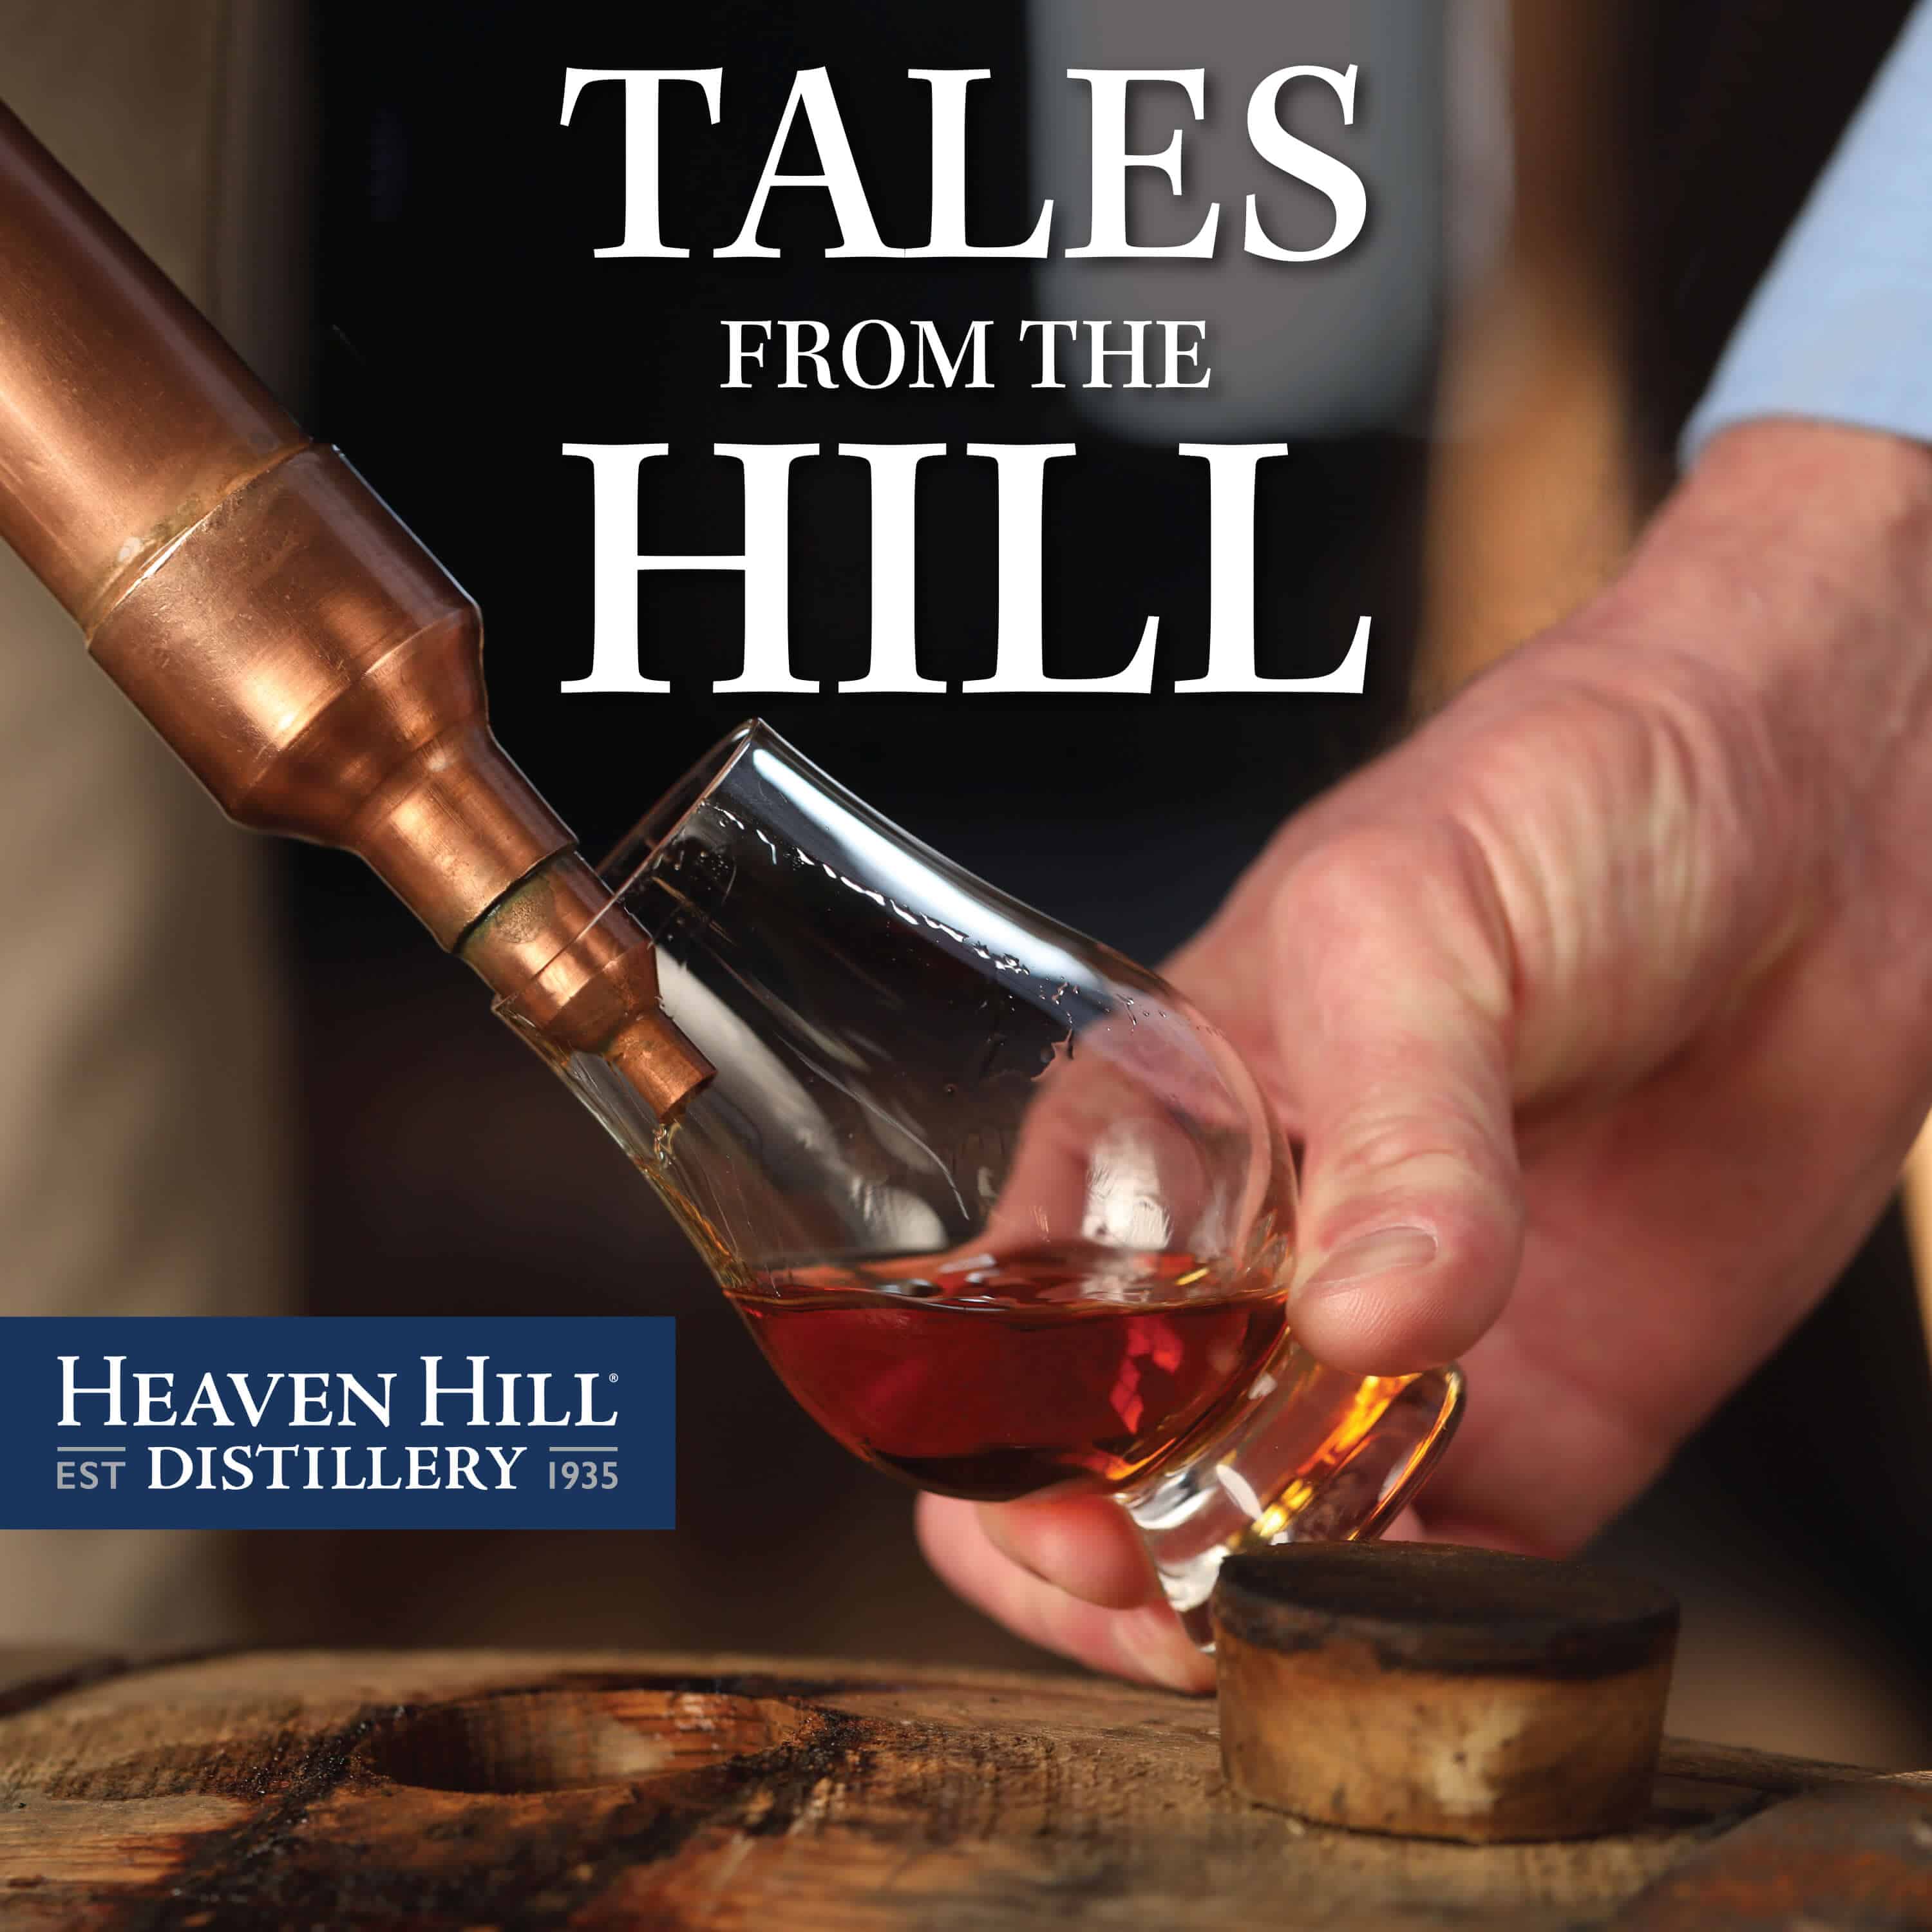 HHD Podcast TalesFromTheHill CoverArt 2019 - Heaven Hill Distillery Launches "Tales from the Hill" Podcast